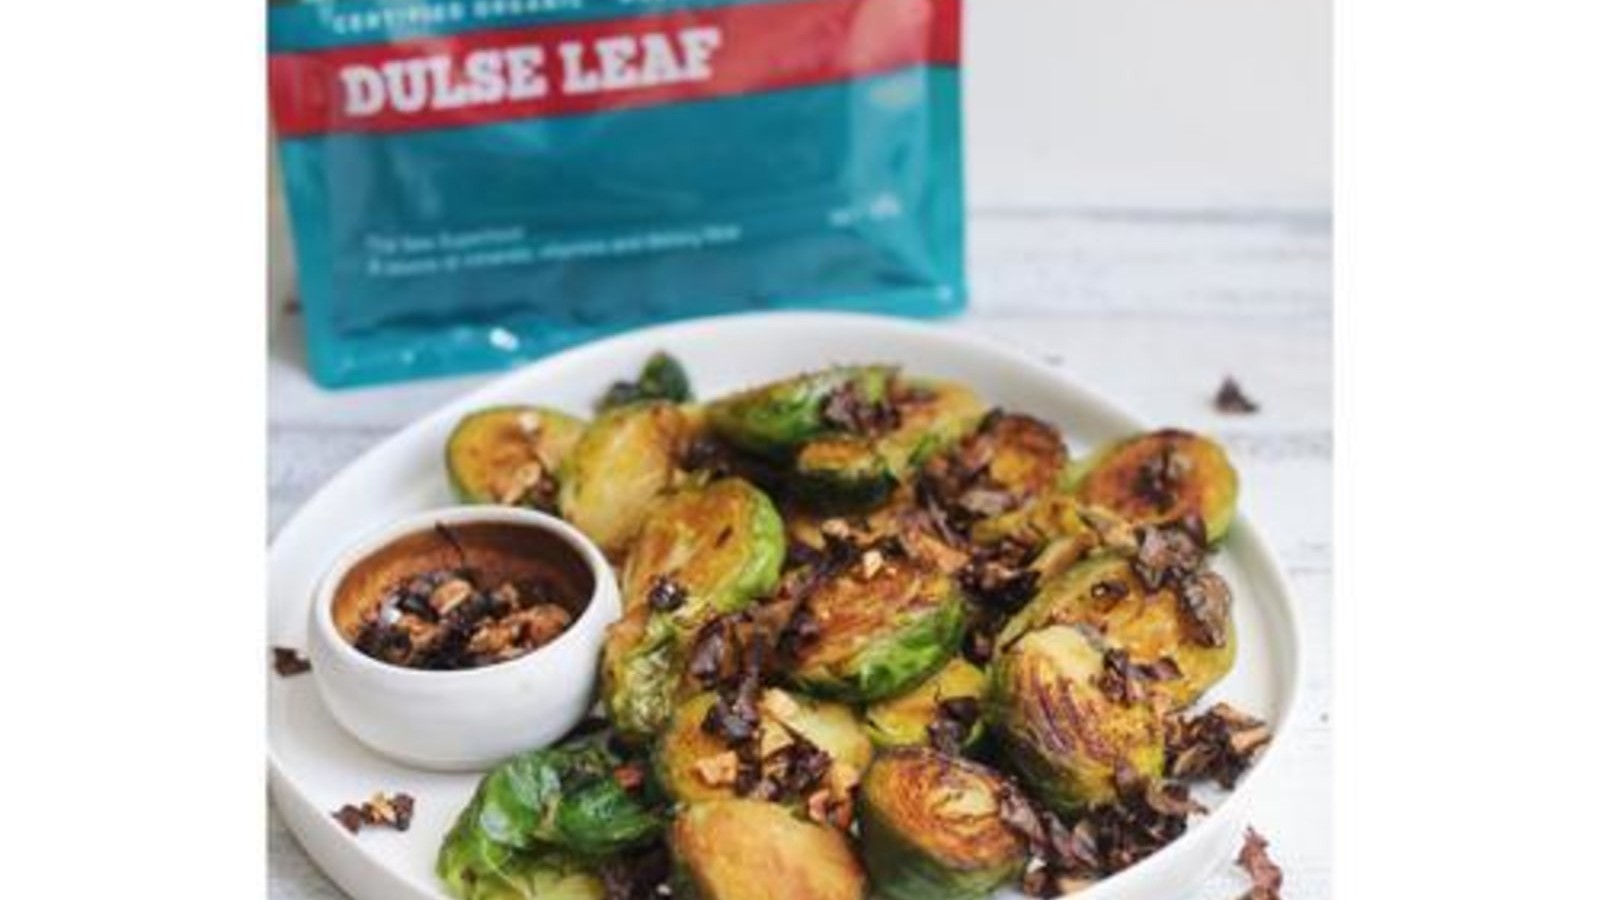 Image of Crispy brussel sprouts with dulse leaf dukkah